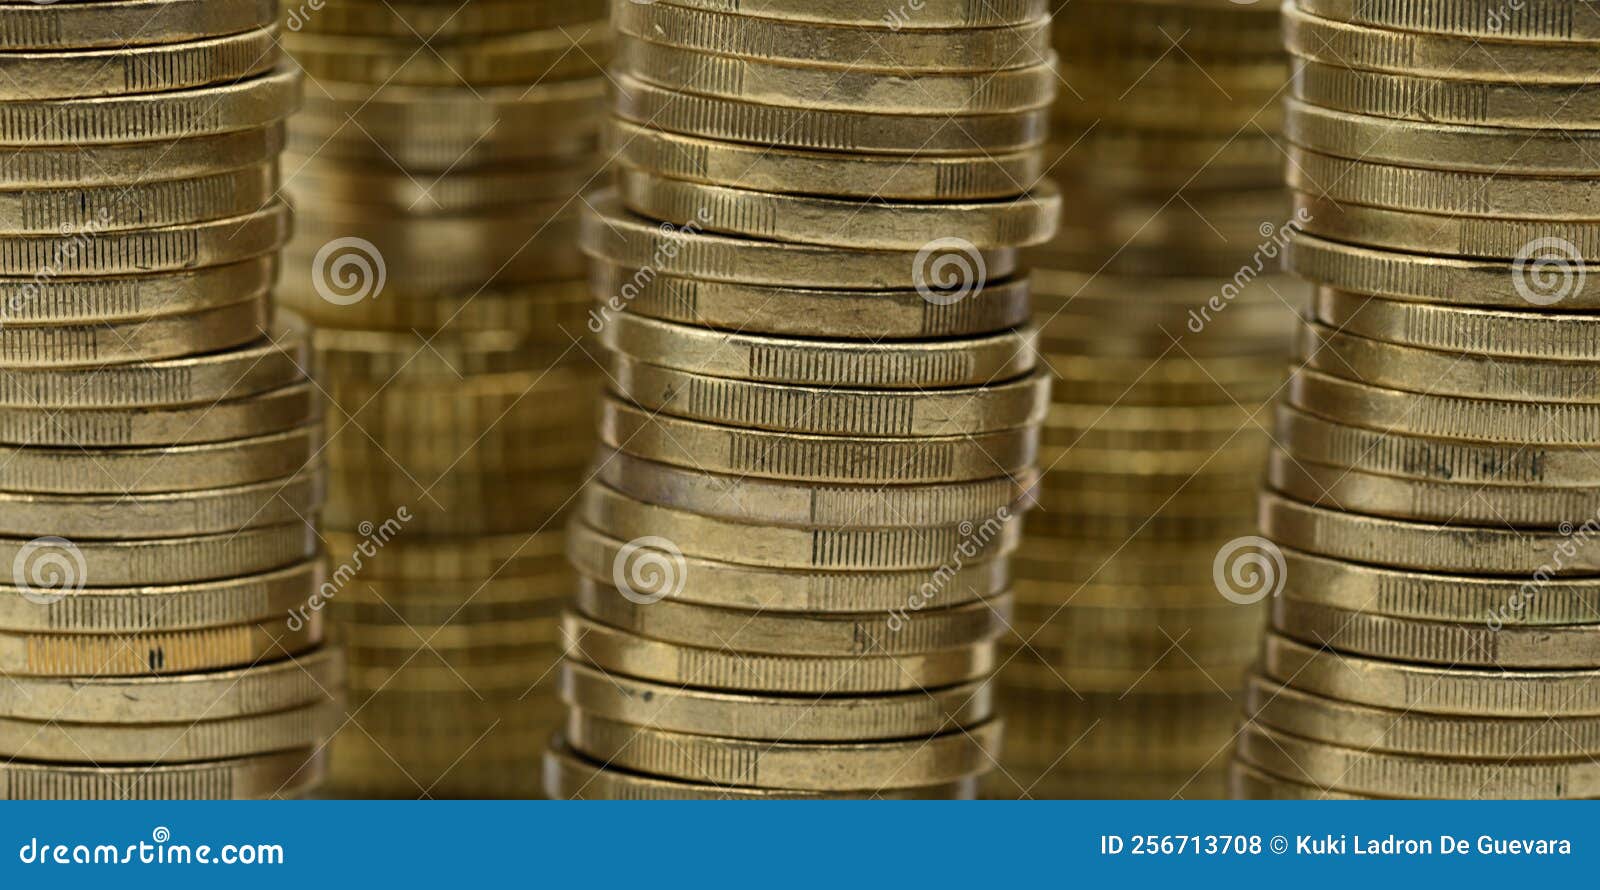 stacks of euro coins, 